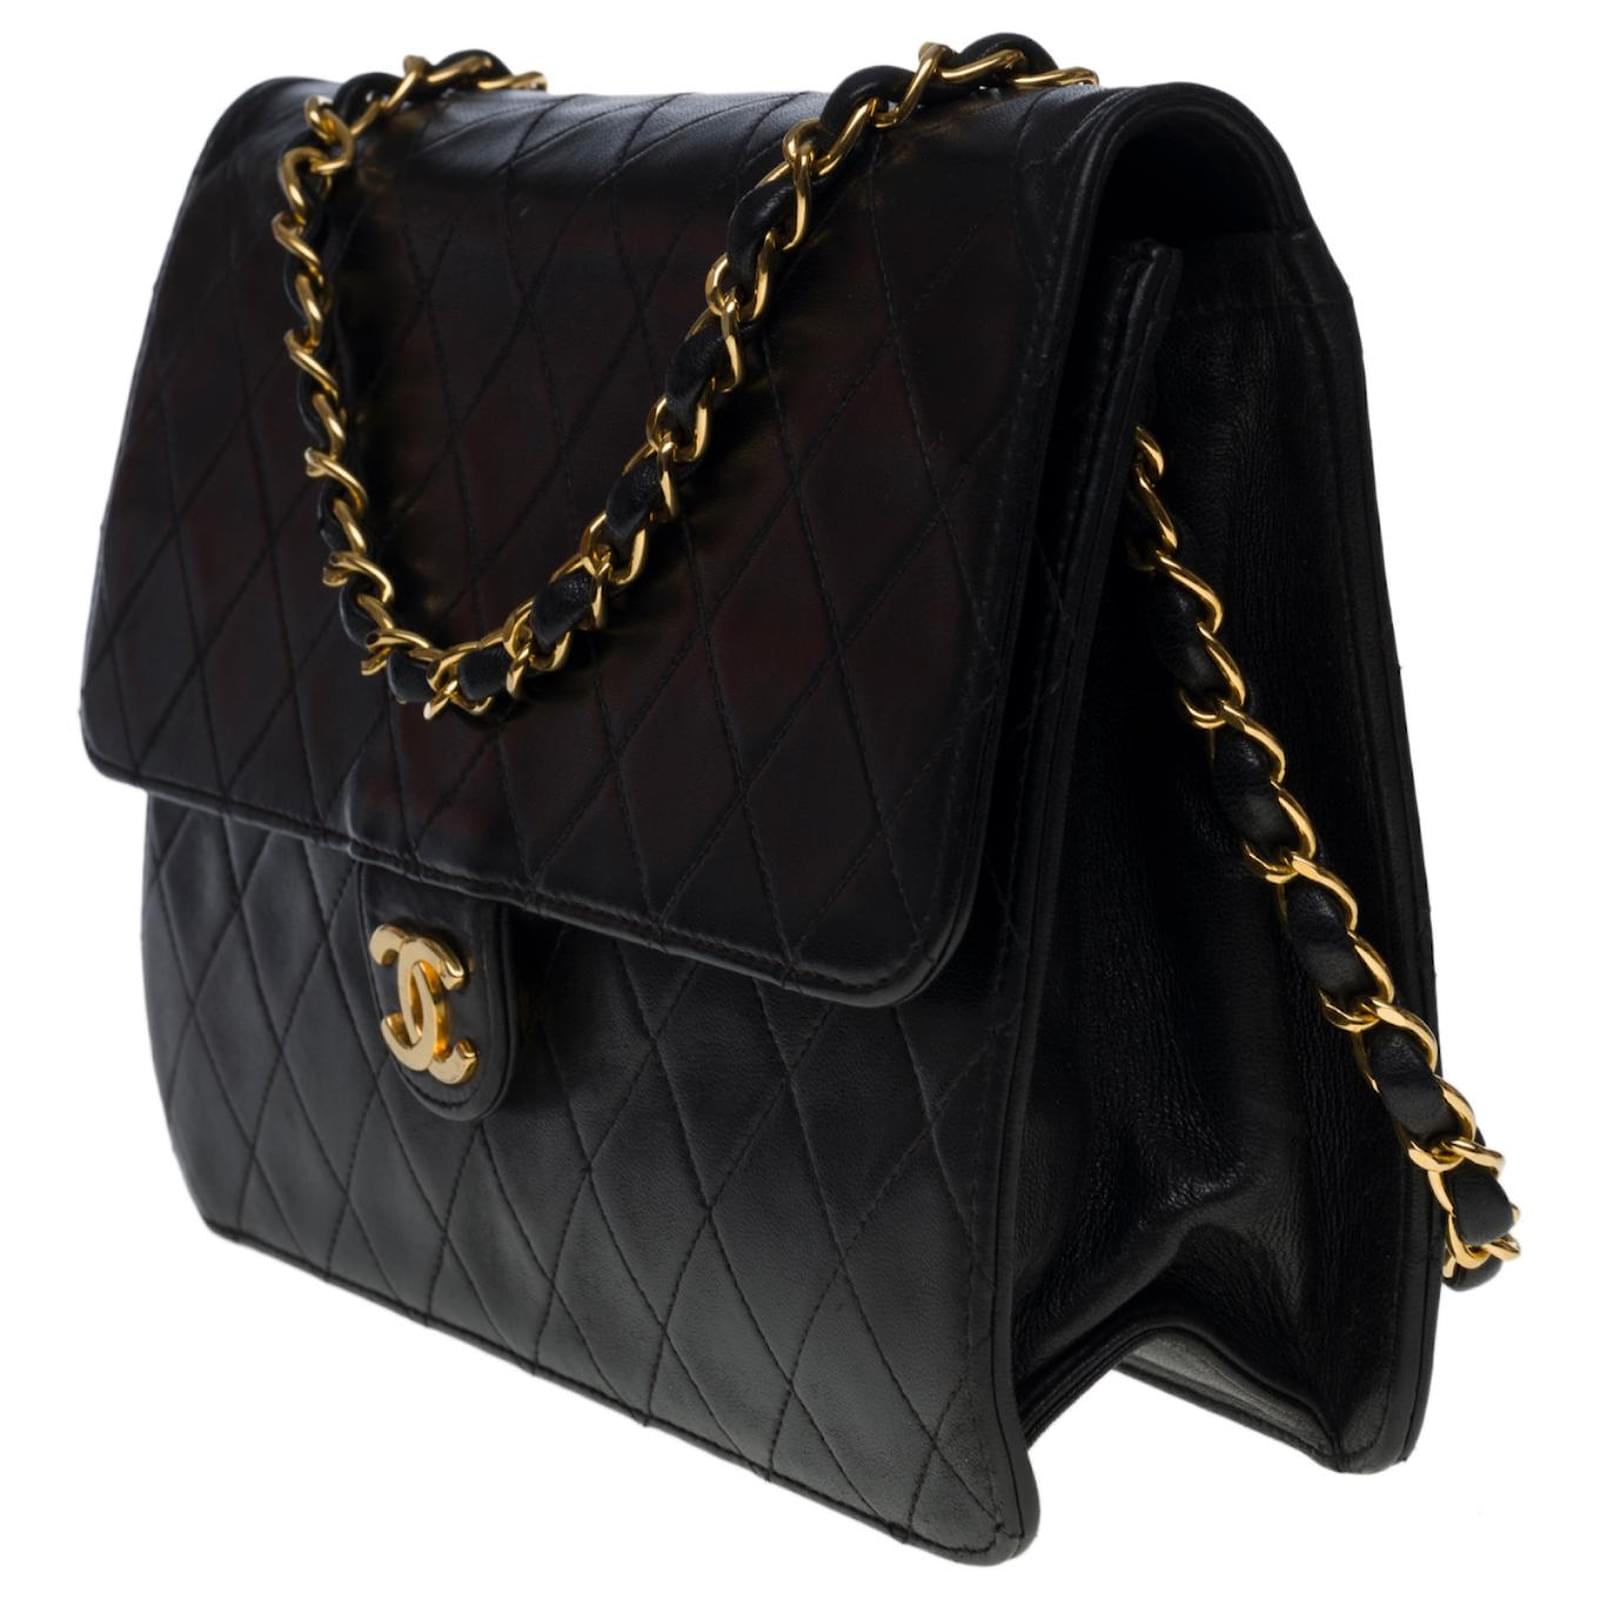 Timeless Very chic Chanel Pochette Classique Medium flap bag in